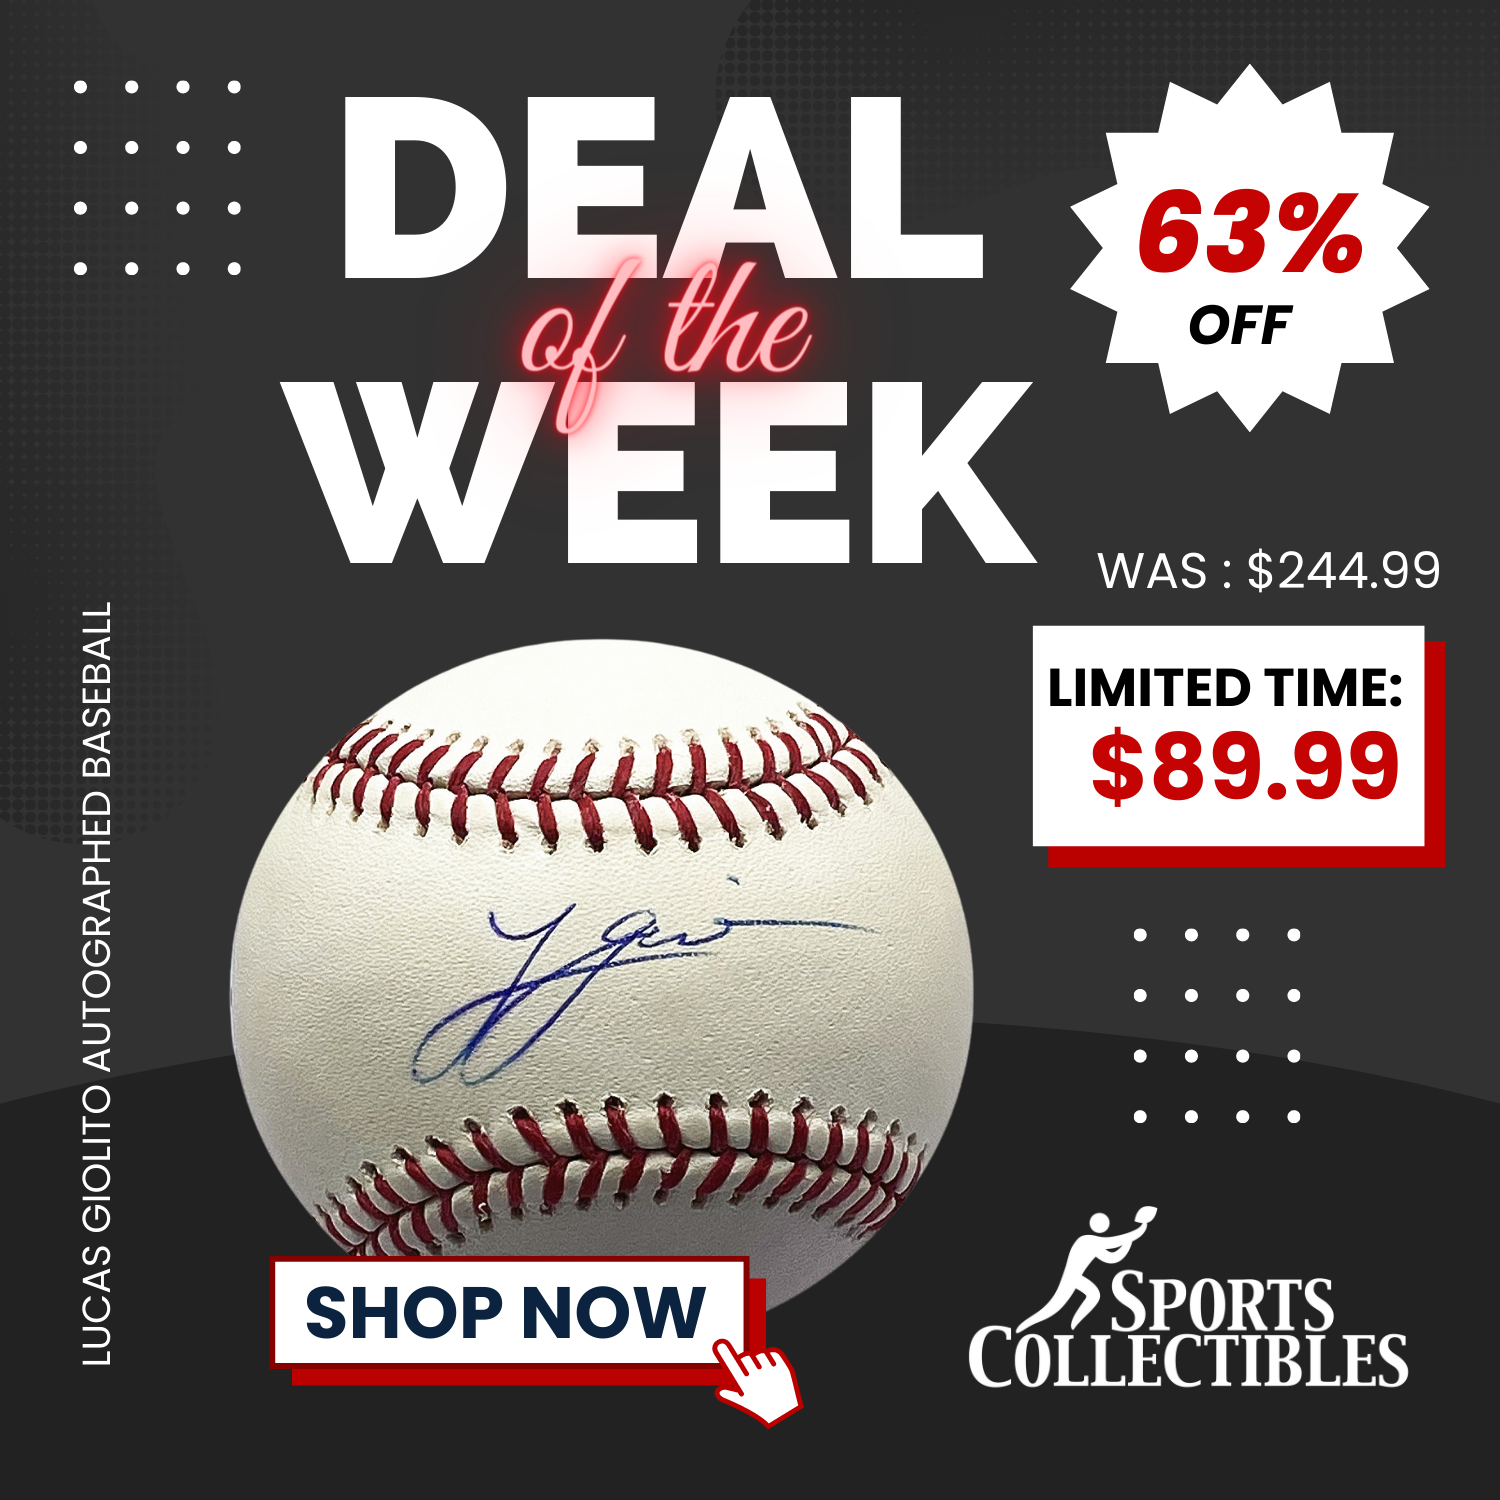 Deal of the Week - Save 63% on this Lucas Giolito Autographed Baseball. Click here to shop now!